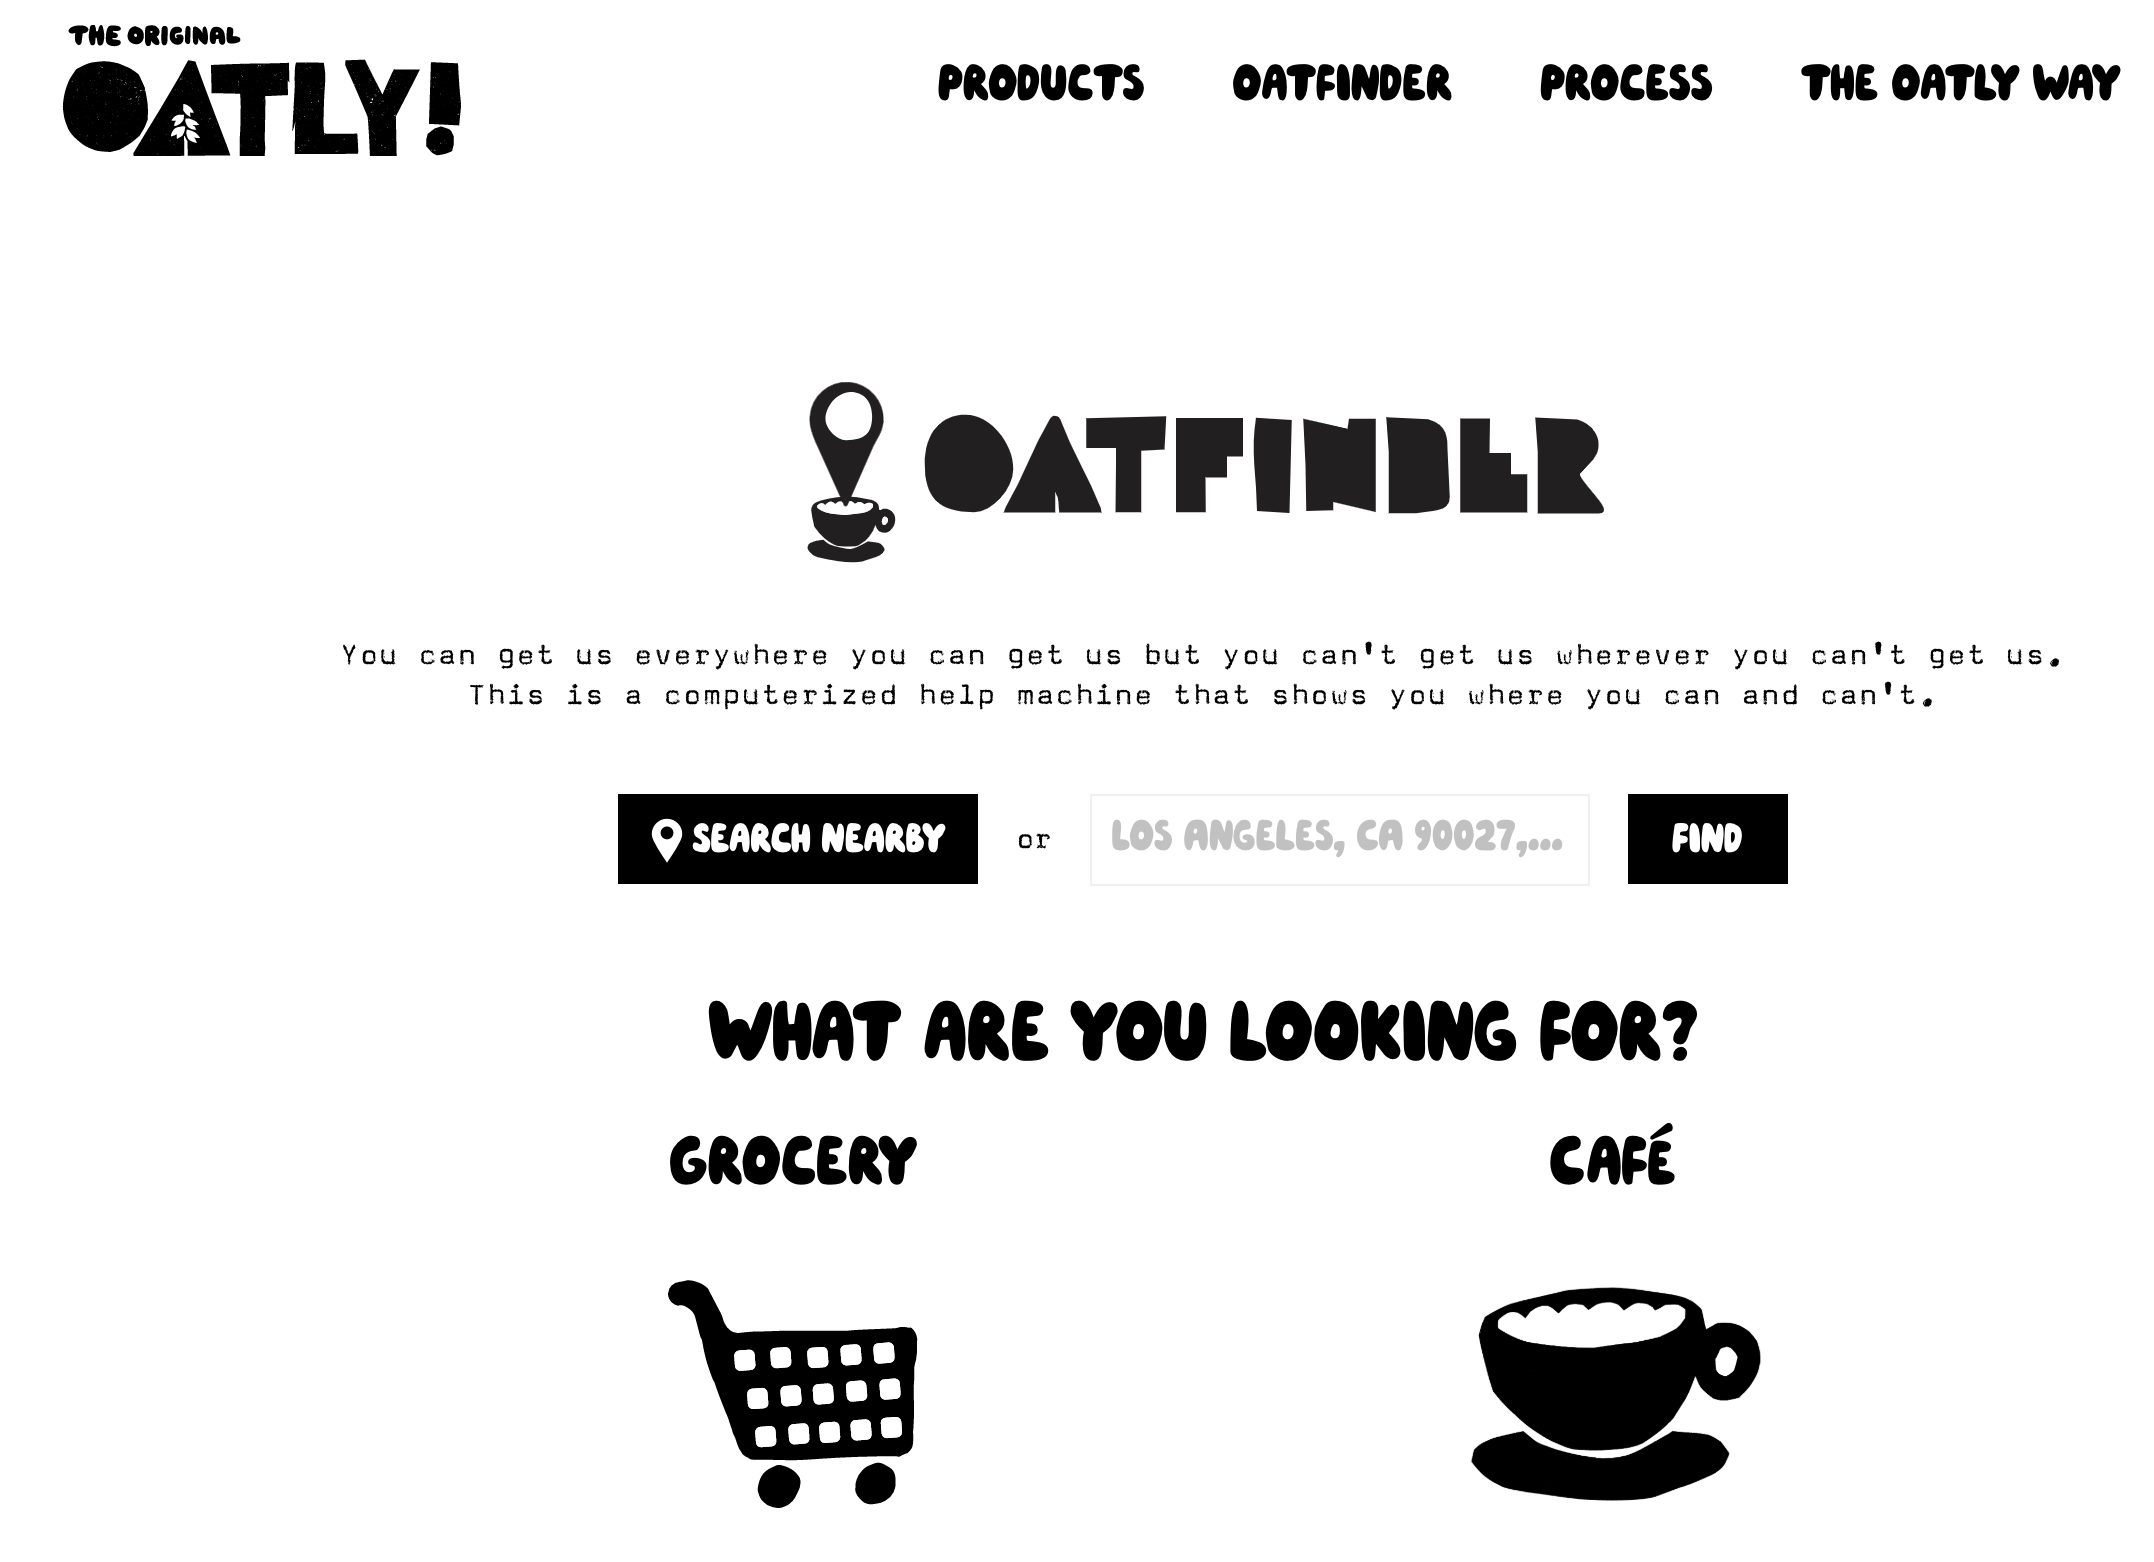 A clever microcopy example from Oatly